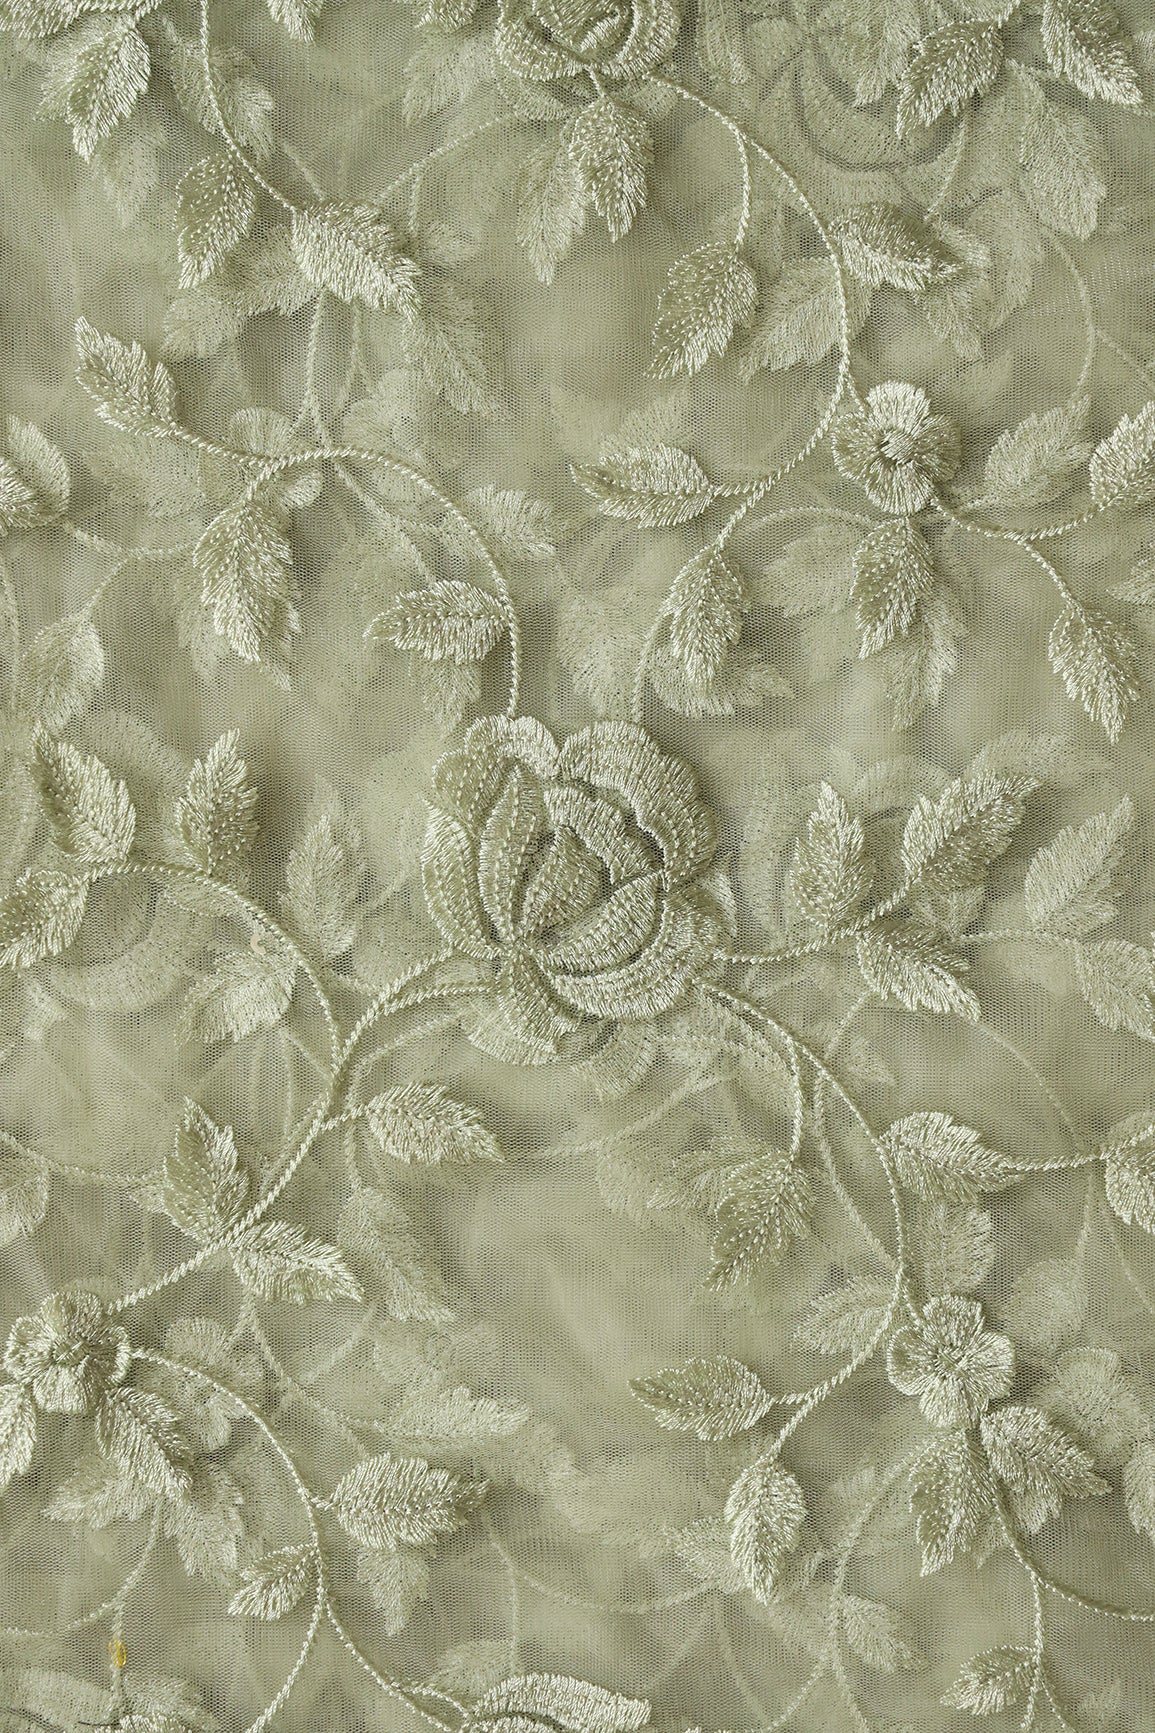 Gorgeous Olive Thread With Sequins Floral Leafy Embroidery On Olive Soft Net Fabric